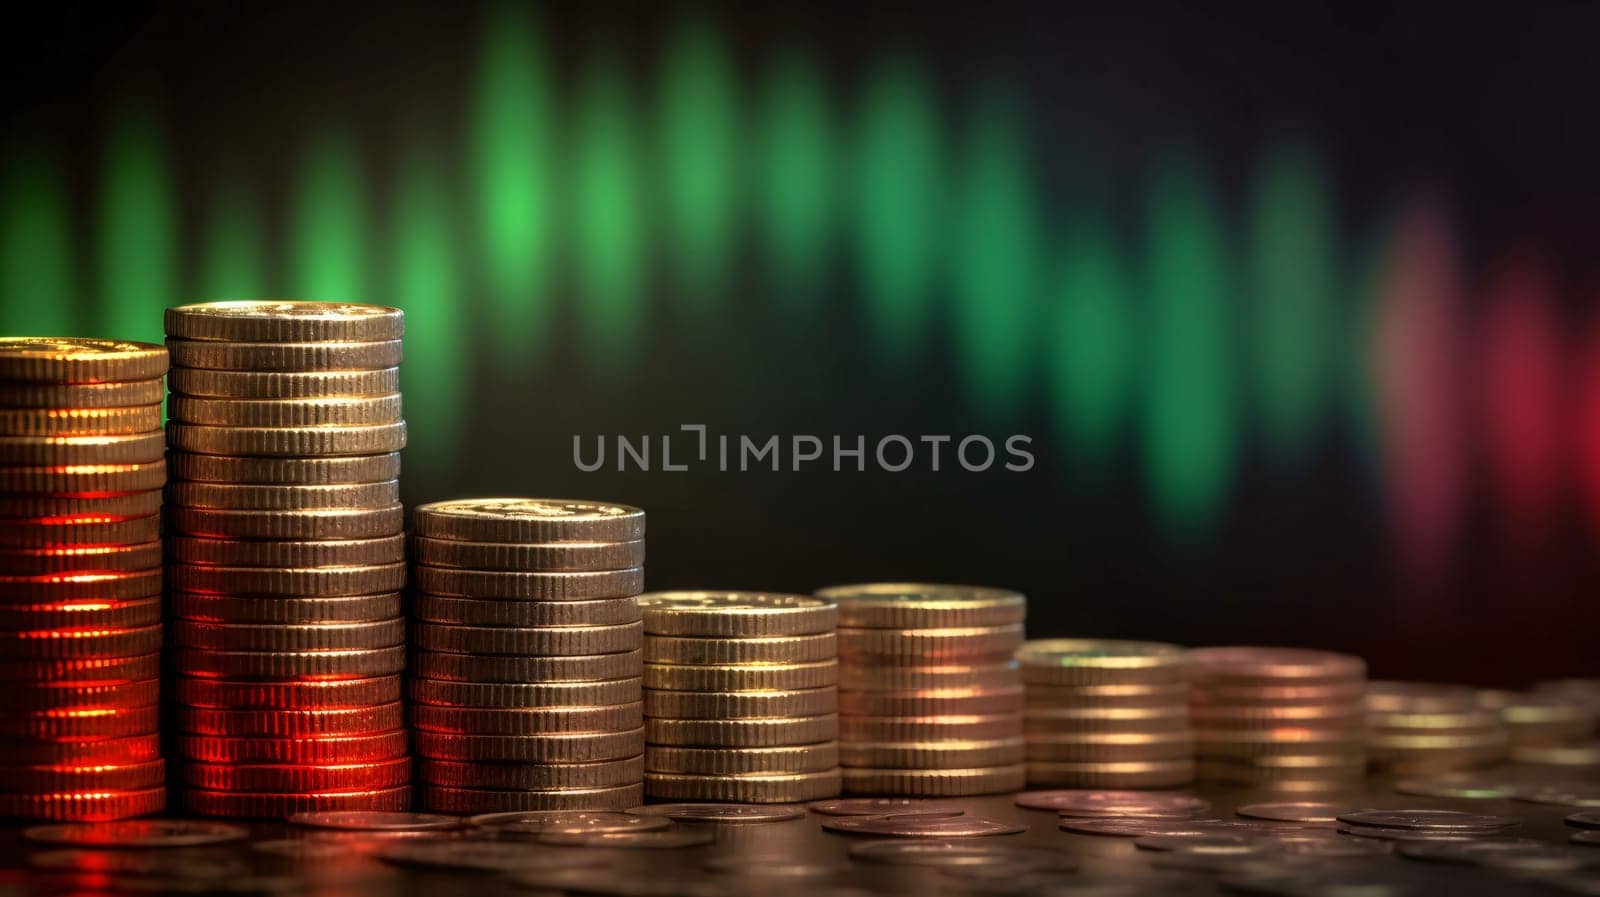 Stock Market: Coins stacked on each other in different positions, with a colorful background.